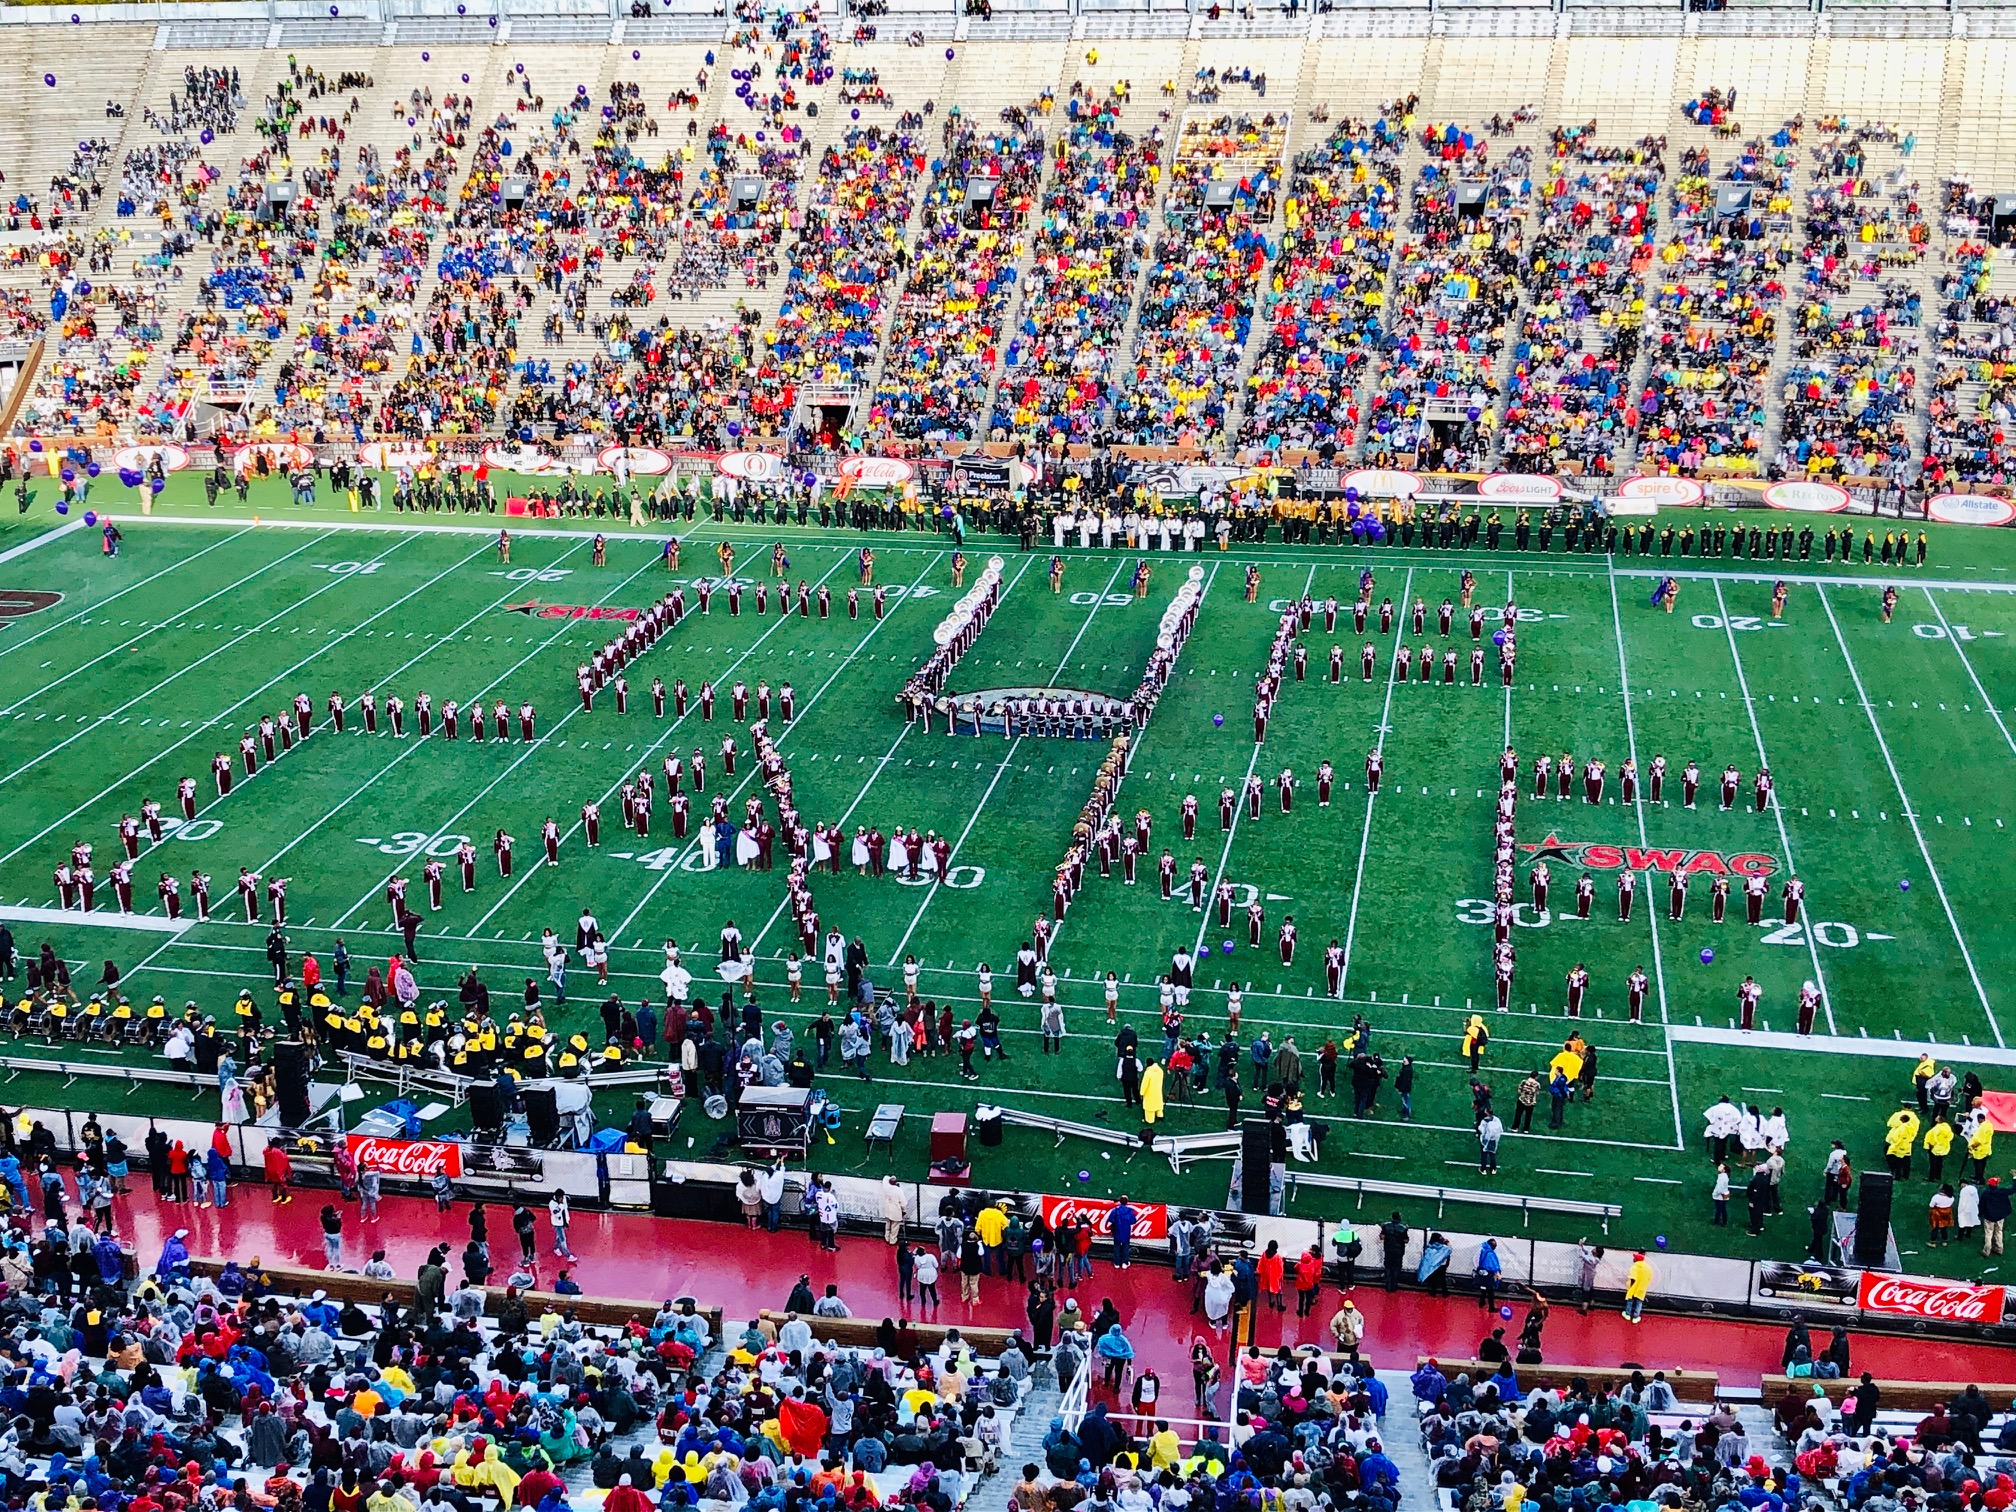 IMG 1411 We saw the true meaning of the Magic City Classic when the Alabama A&M band spelled out "Cupcake"